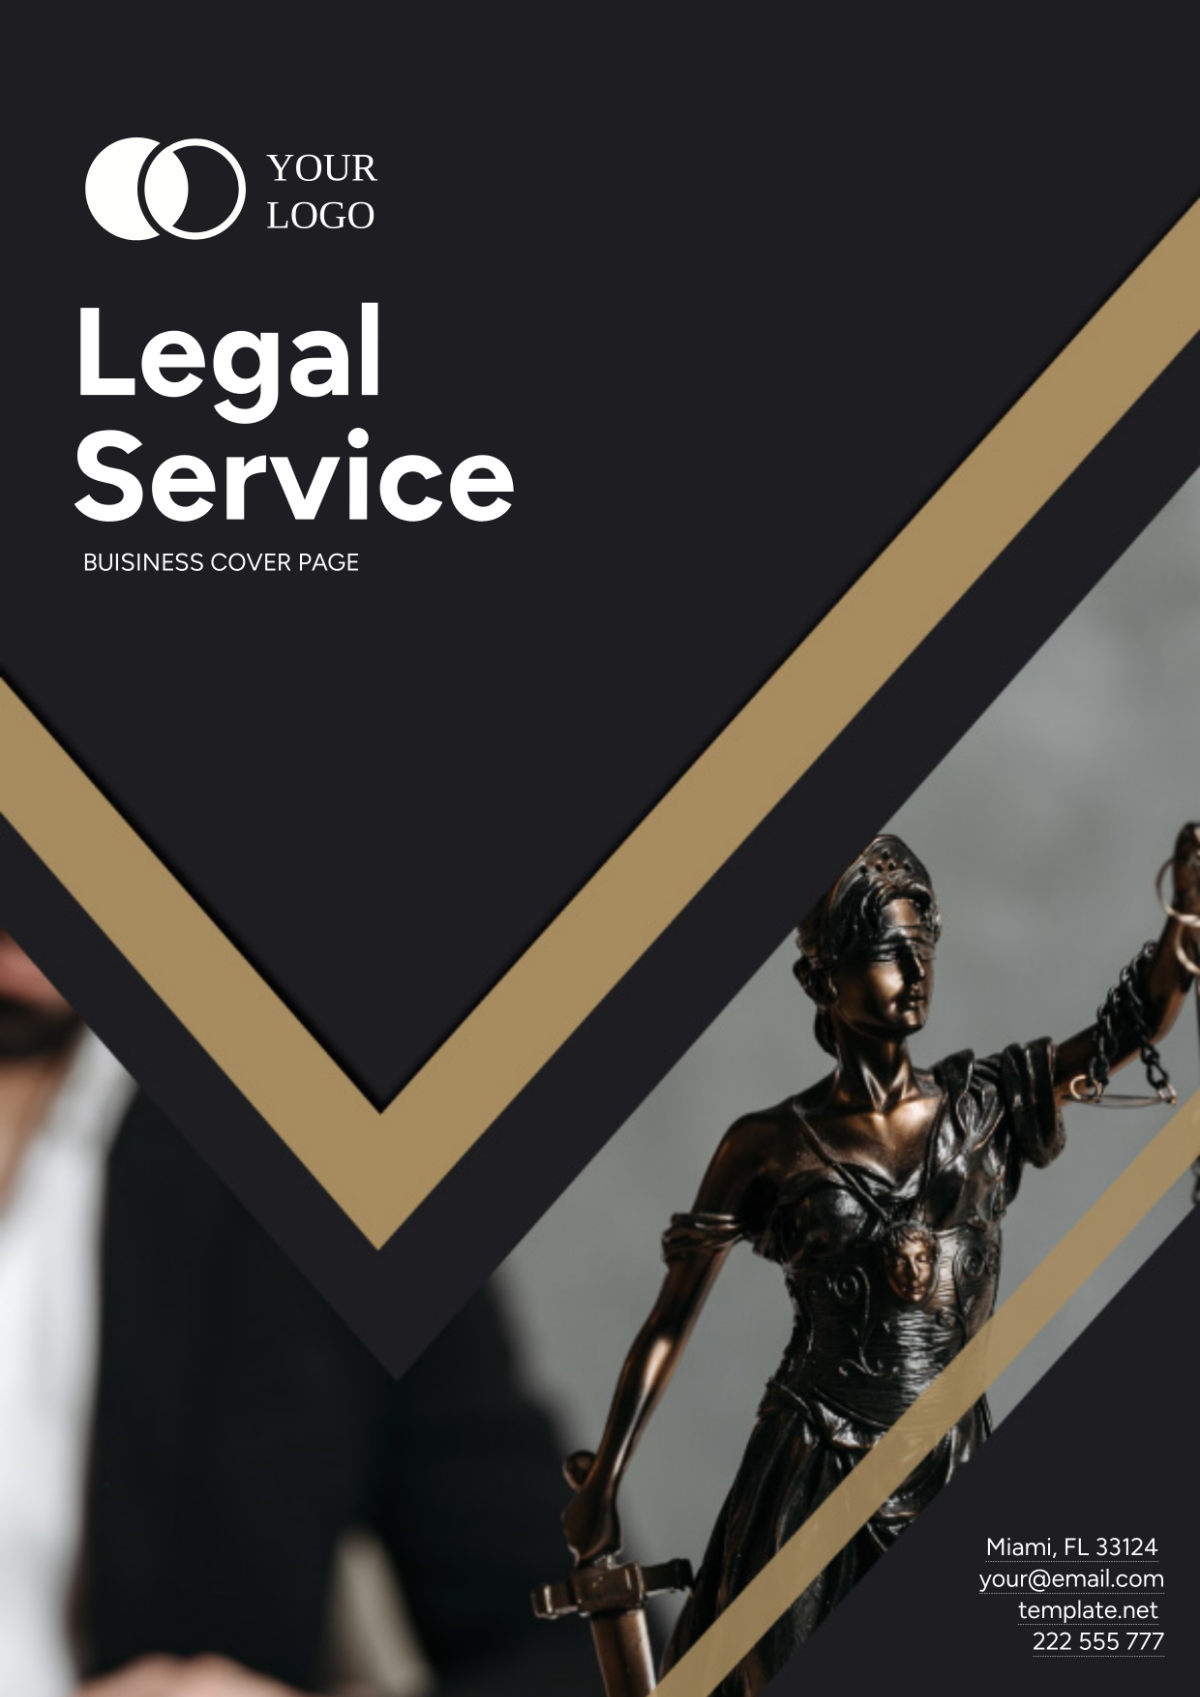 Legal Services Business Cover Page Template